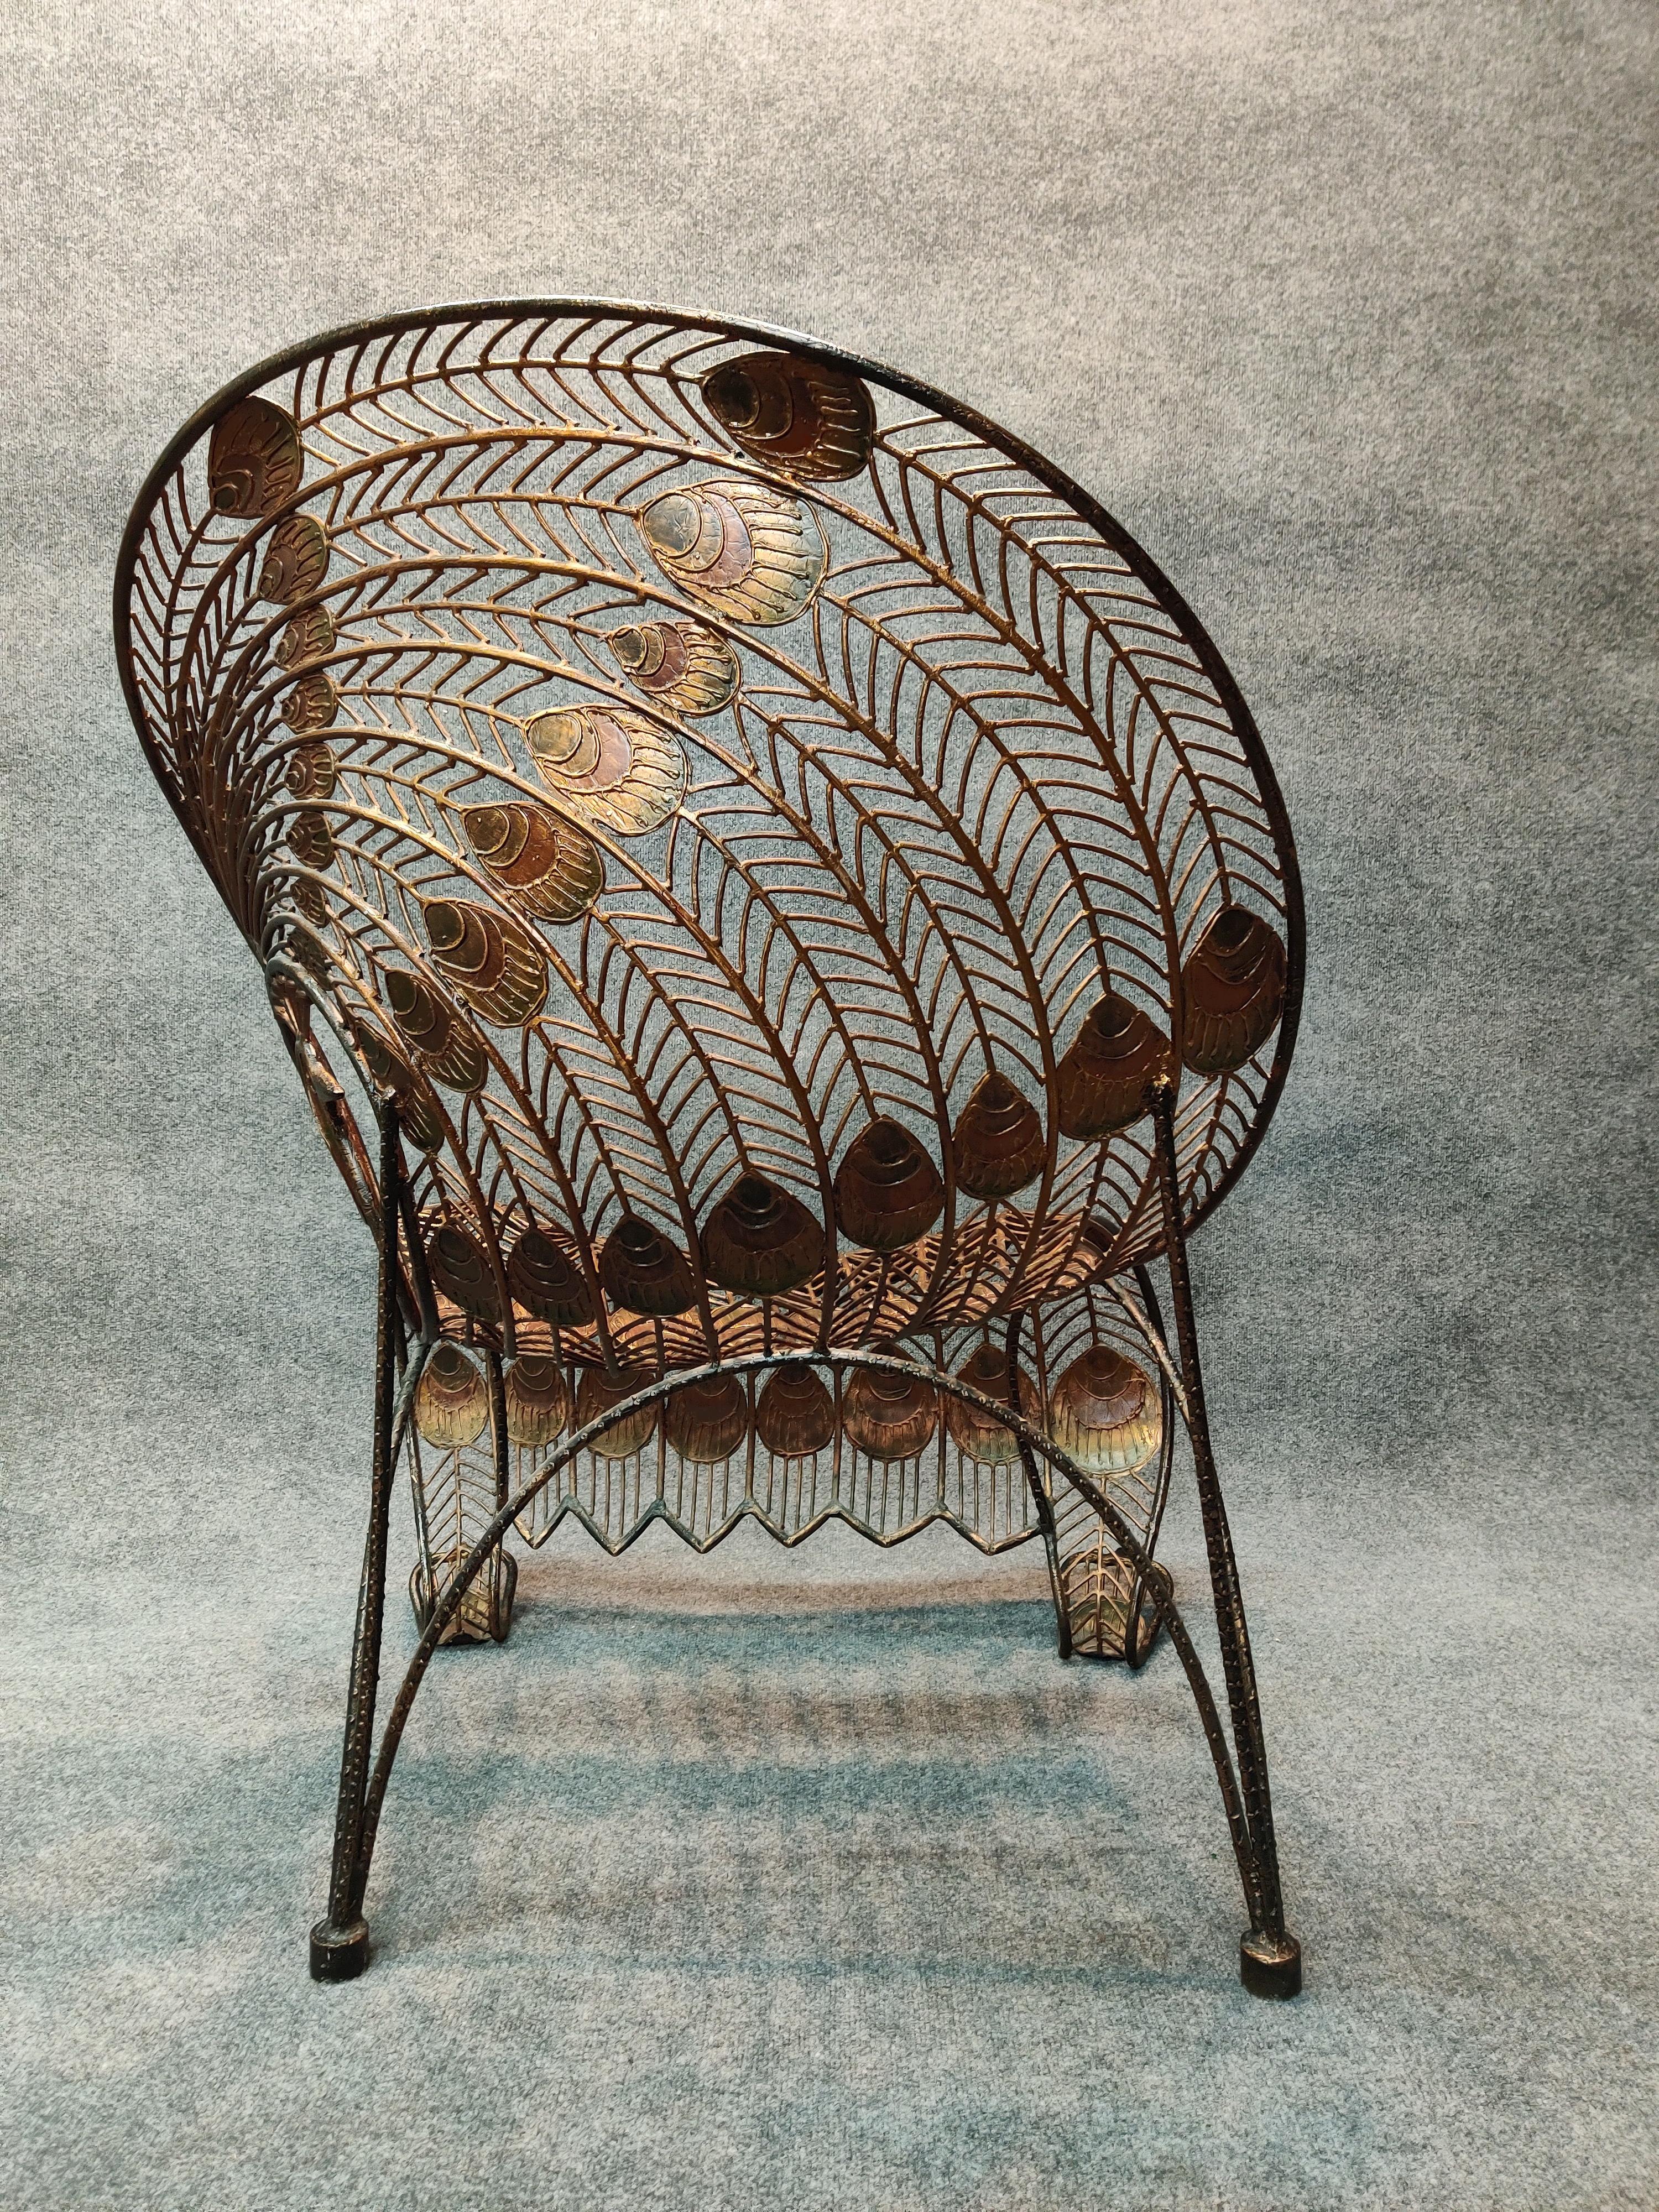 Mid-Century Modern Large Wrought Iron Sculptural Peacock Chair Brutalist Mid-Century Inspired 